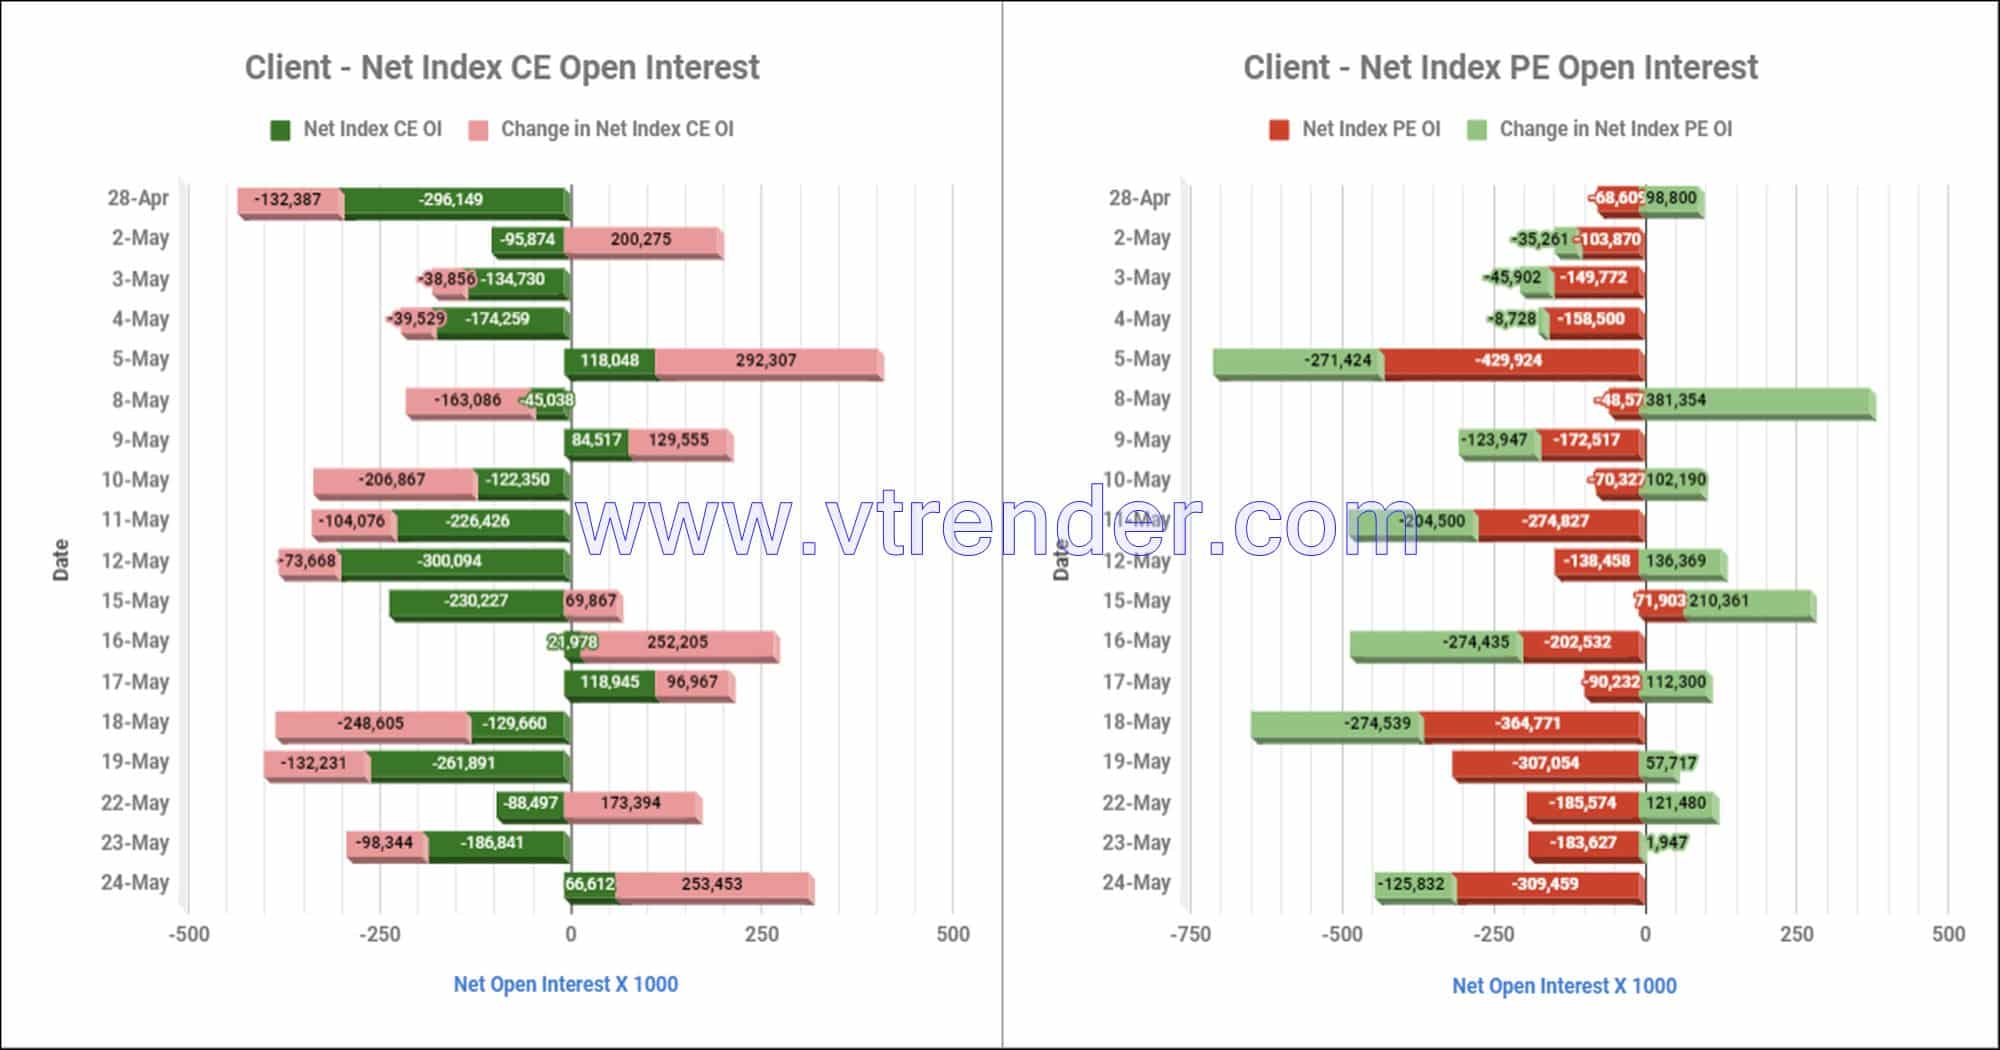 Clientinop24May Participantwise Net Open Interest And Net Equity Investments – 24Th May 2023 Client, Equity, Fii, Index Futures, Index Options, Open Interest, Prop